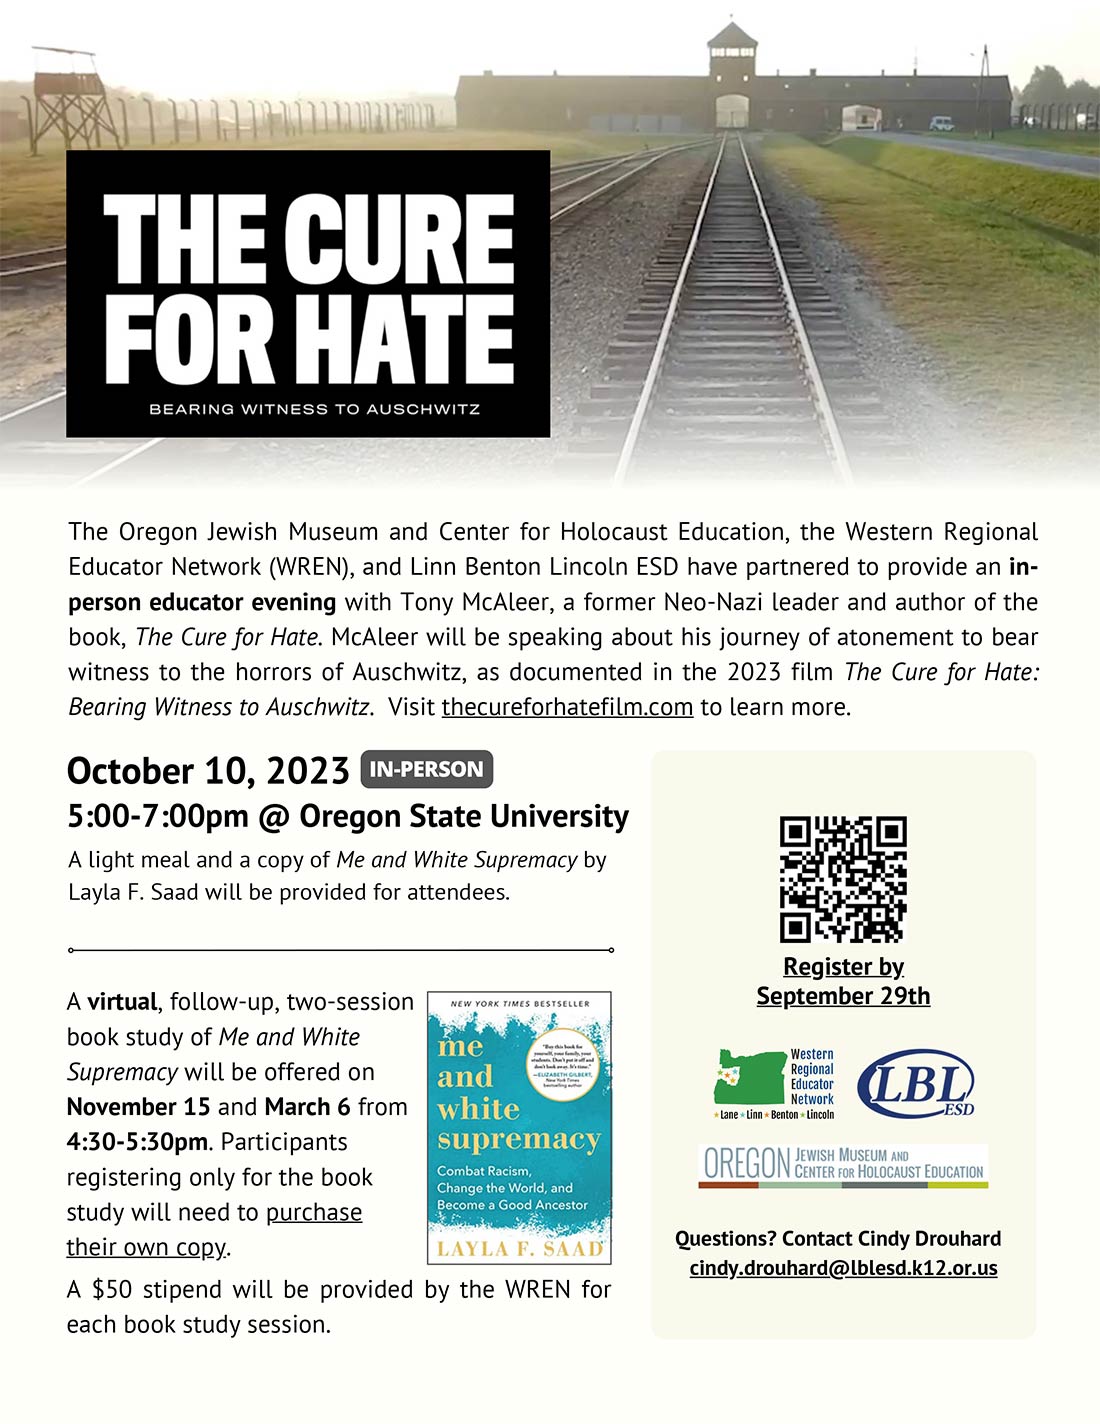 "The Cure for Hate" In-Person Educator Evening (October 10, 2023)